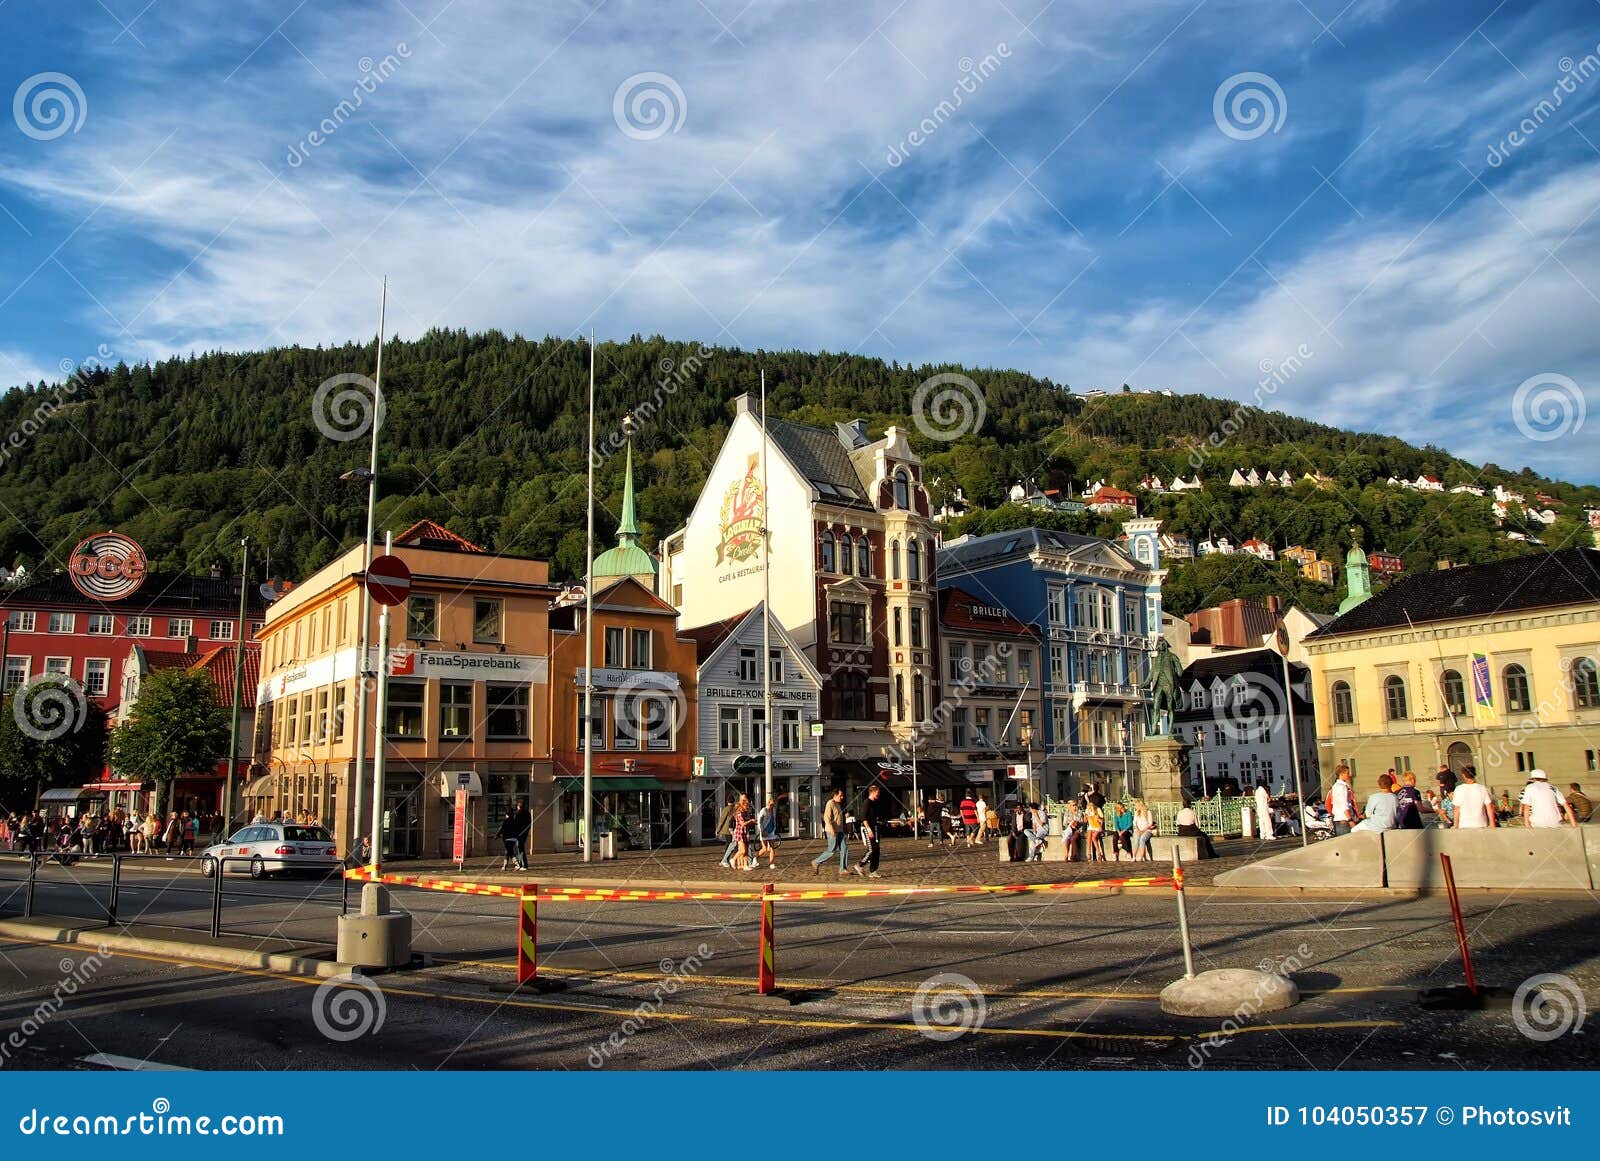 Street Road in City Center Bergen, Norway Editorial Photography - Image of road, architecture: 104050357